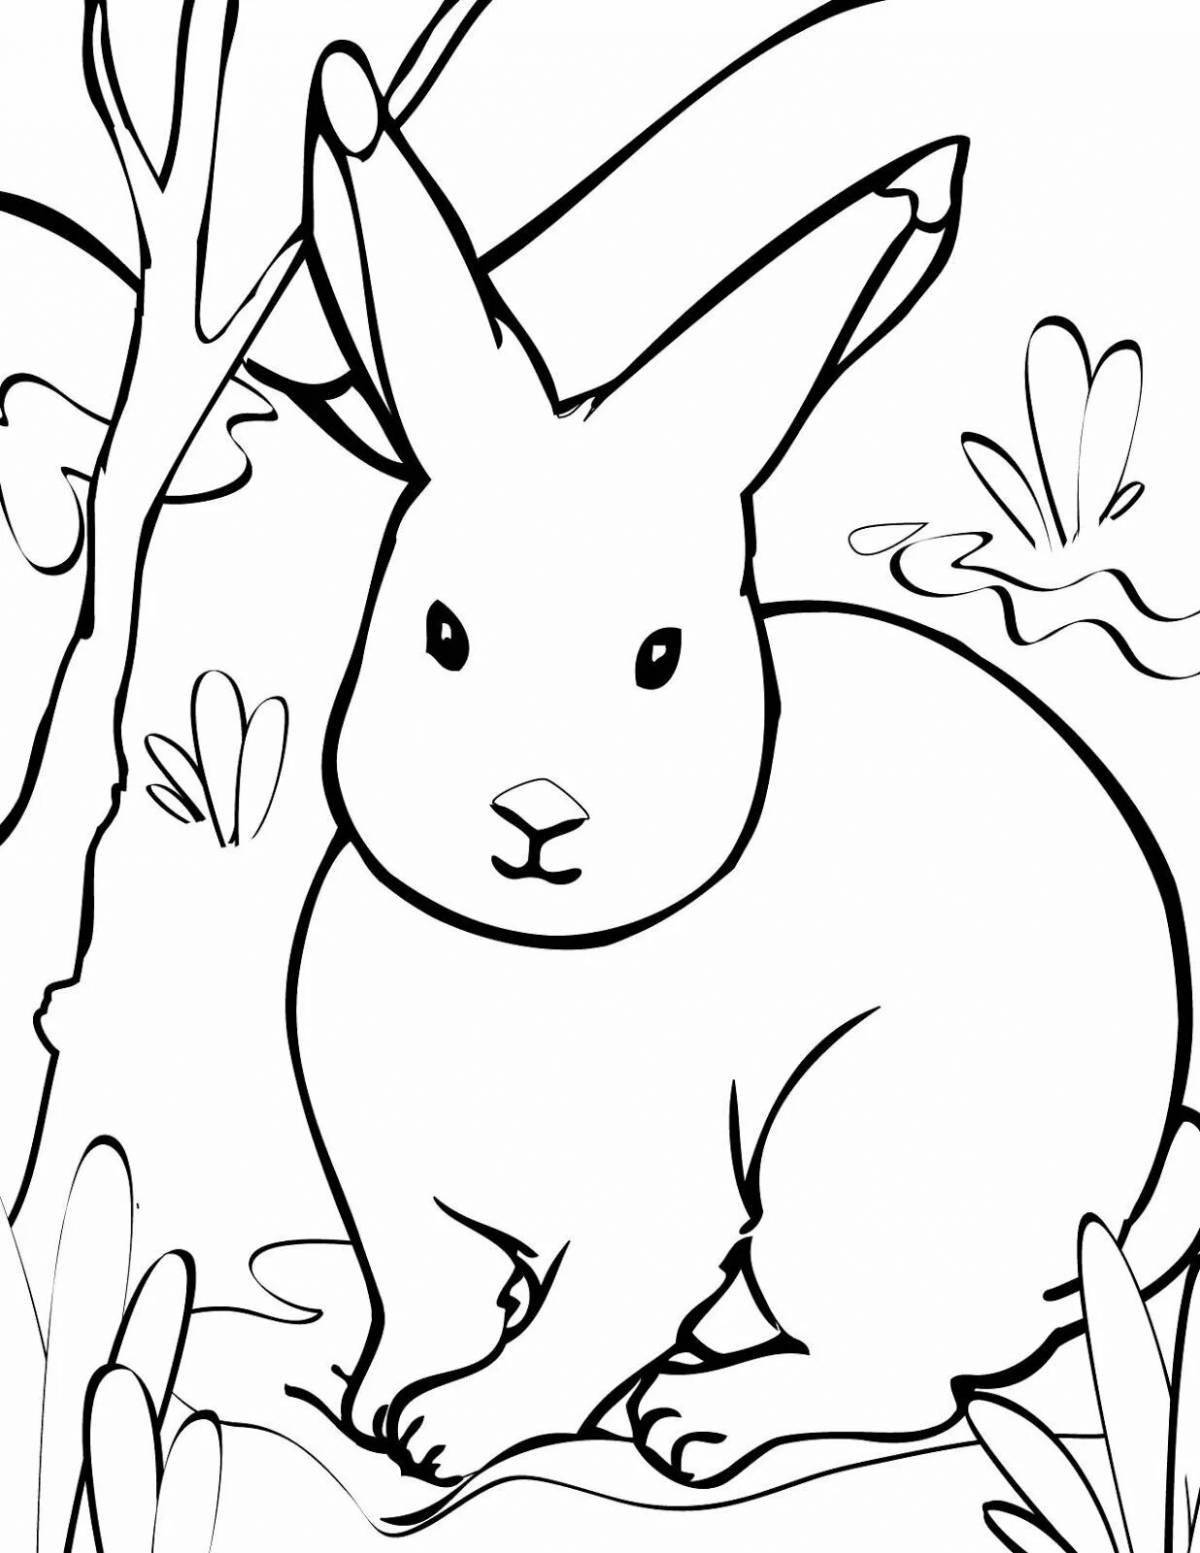 Coloring forest animals for preschoolers